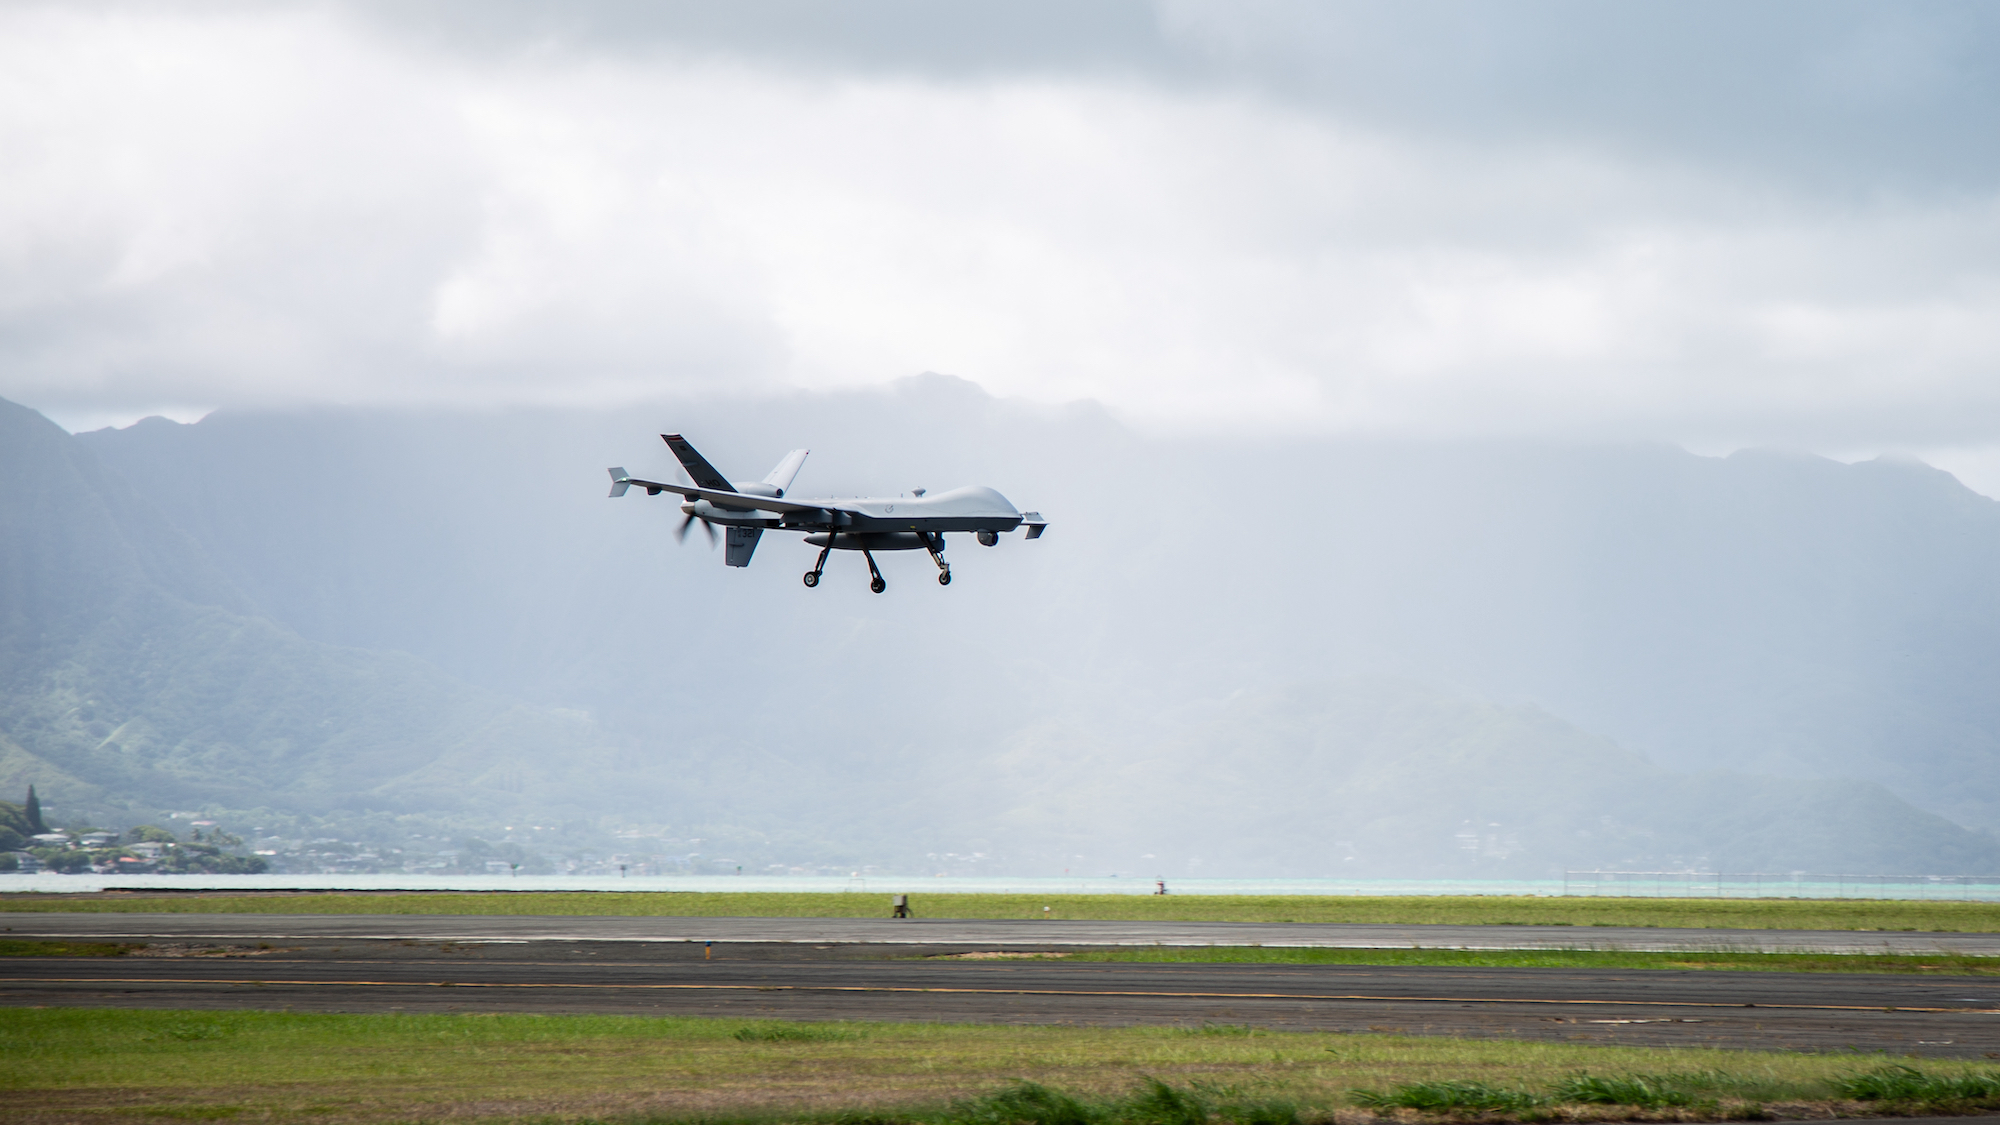 An MQ-1C Gray Eagle drone (which is smaller than the Reaper) in Hawaii on Oct. 1, 2021.